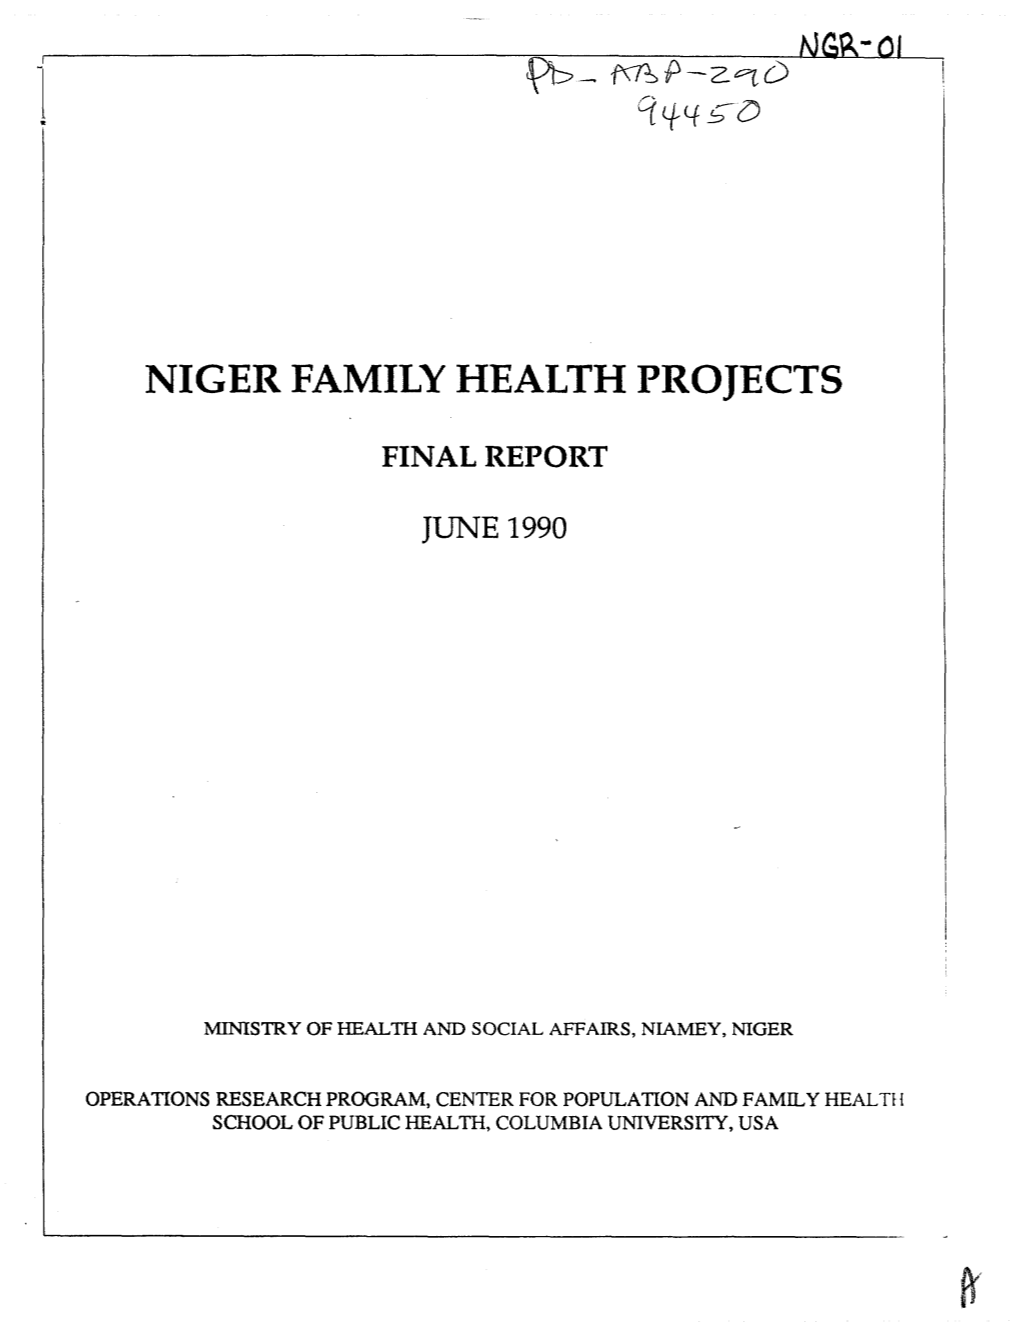 Niger Family Health Projects